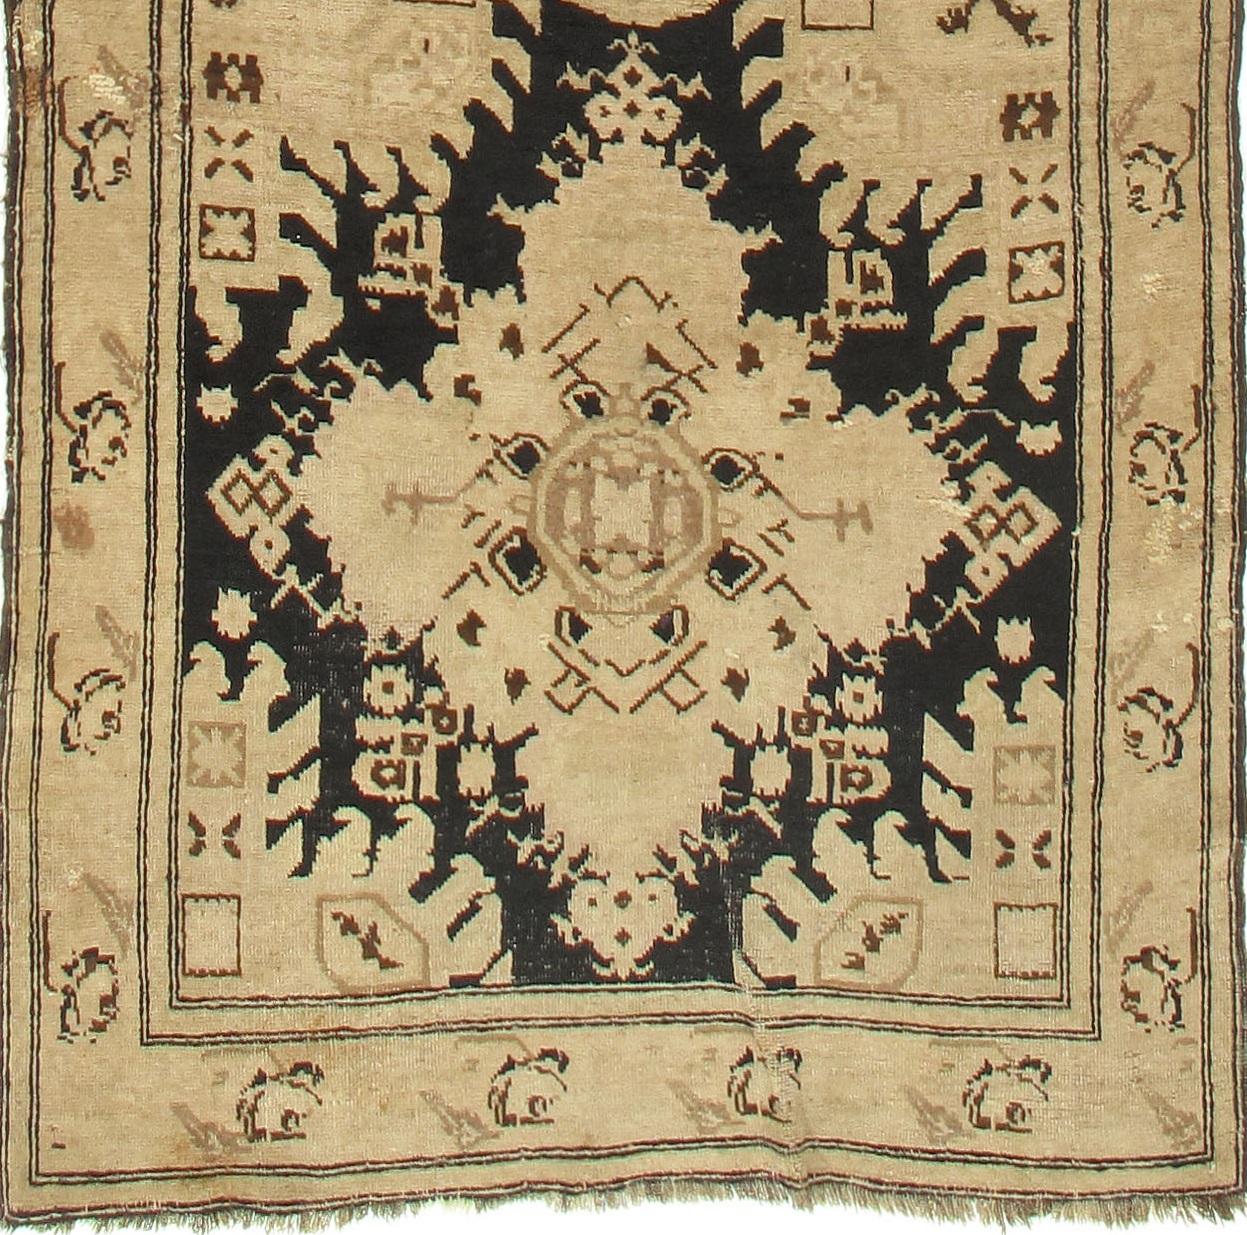 Antique Karabagh runner. Size: 3'7 x 18'9.  Across the Aras river from Karajeh is the Armenian Caucasian rug area of Karabagh (Black Garden) which wove scatters, runners and gallery rugs from the 17th century onwards, often with cochineal reds and